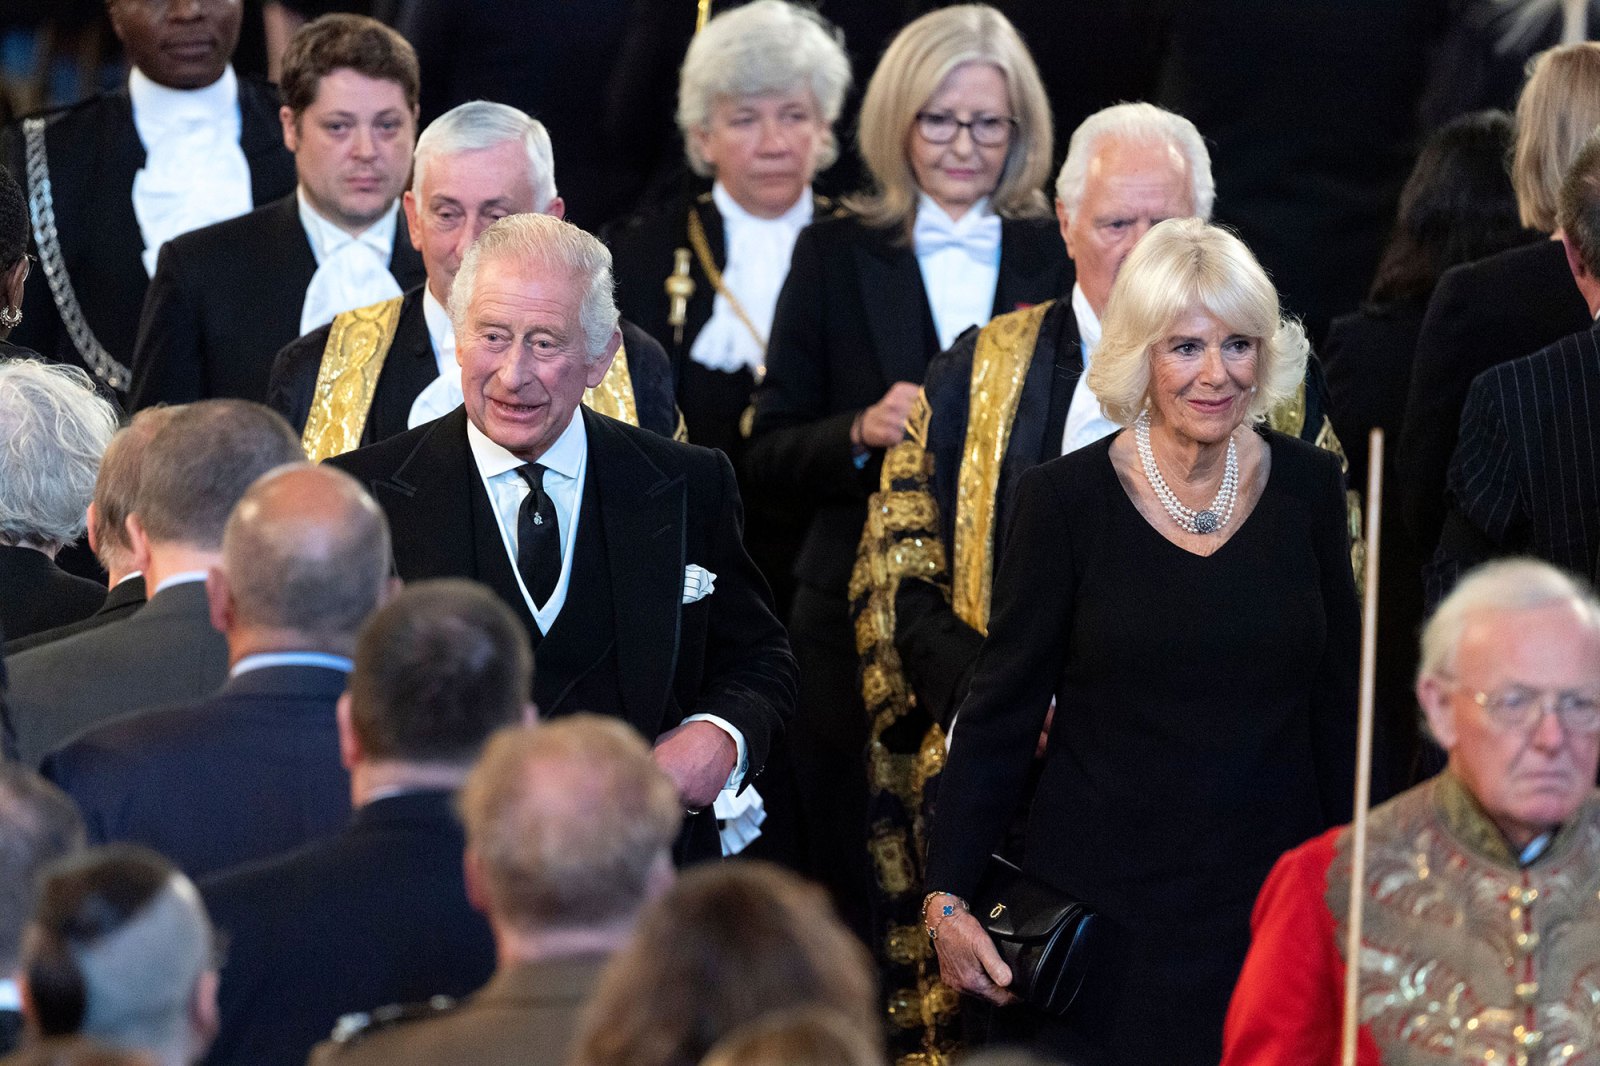 King Charles III and Camilla Queen Consort Sit on the Throne for the 1st Time During Parliament Address 5